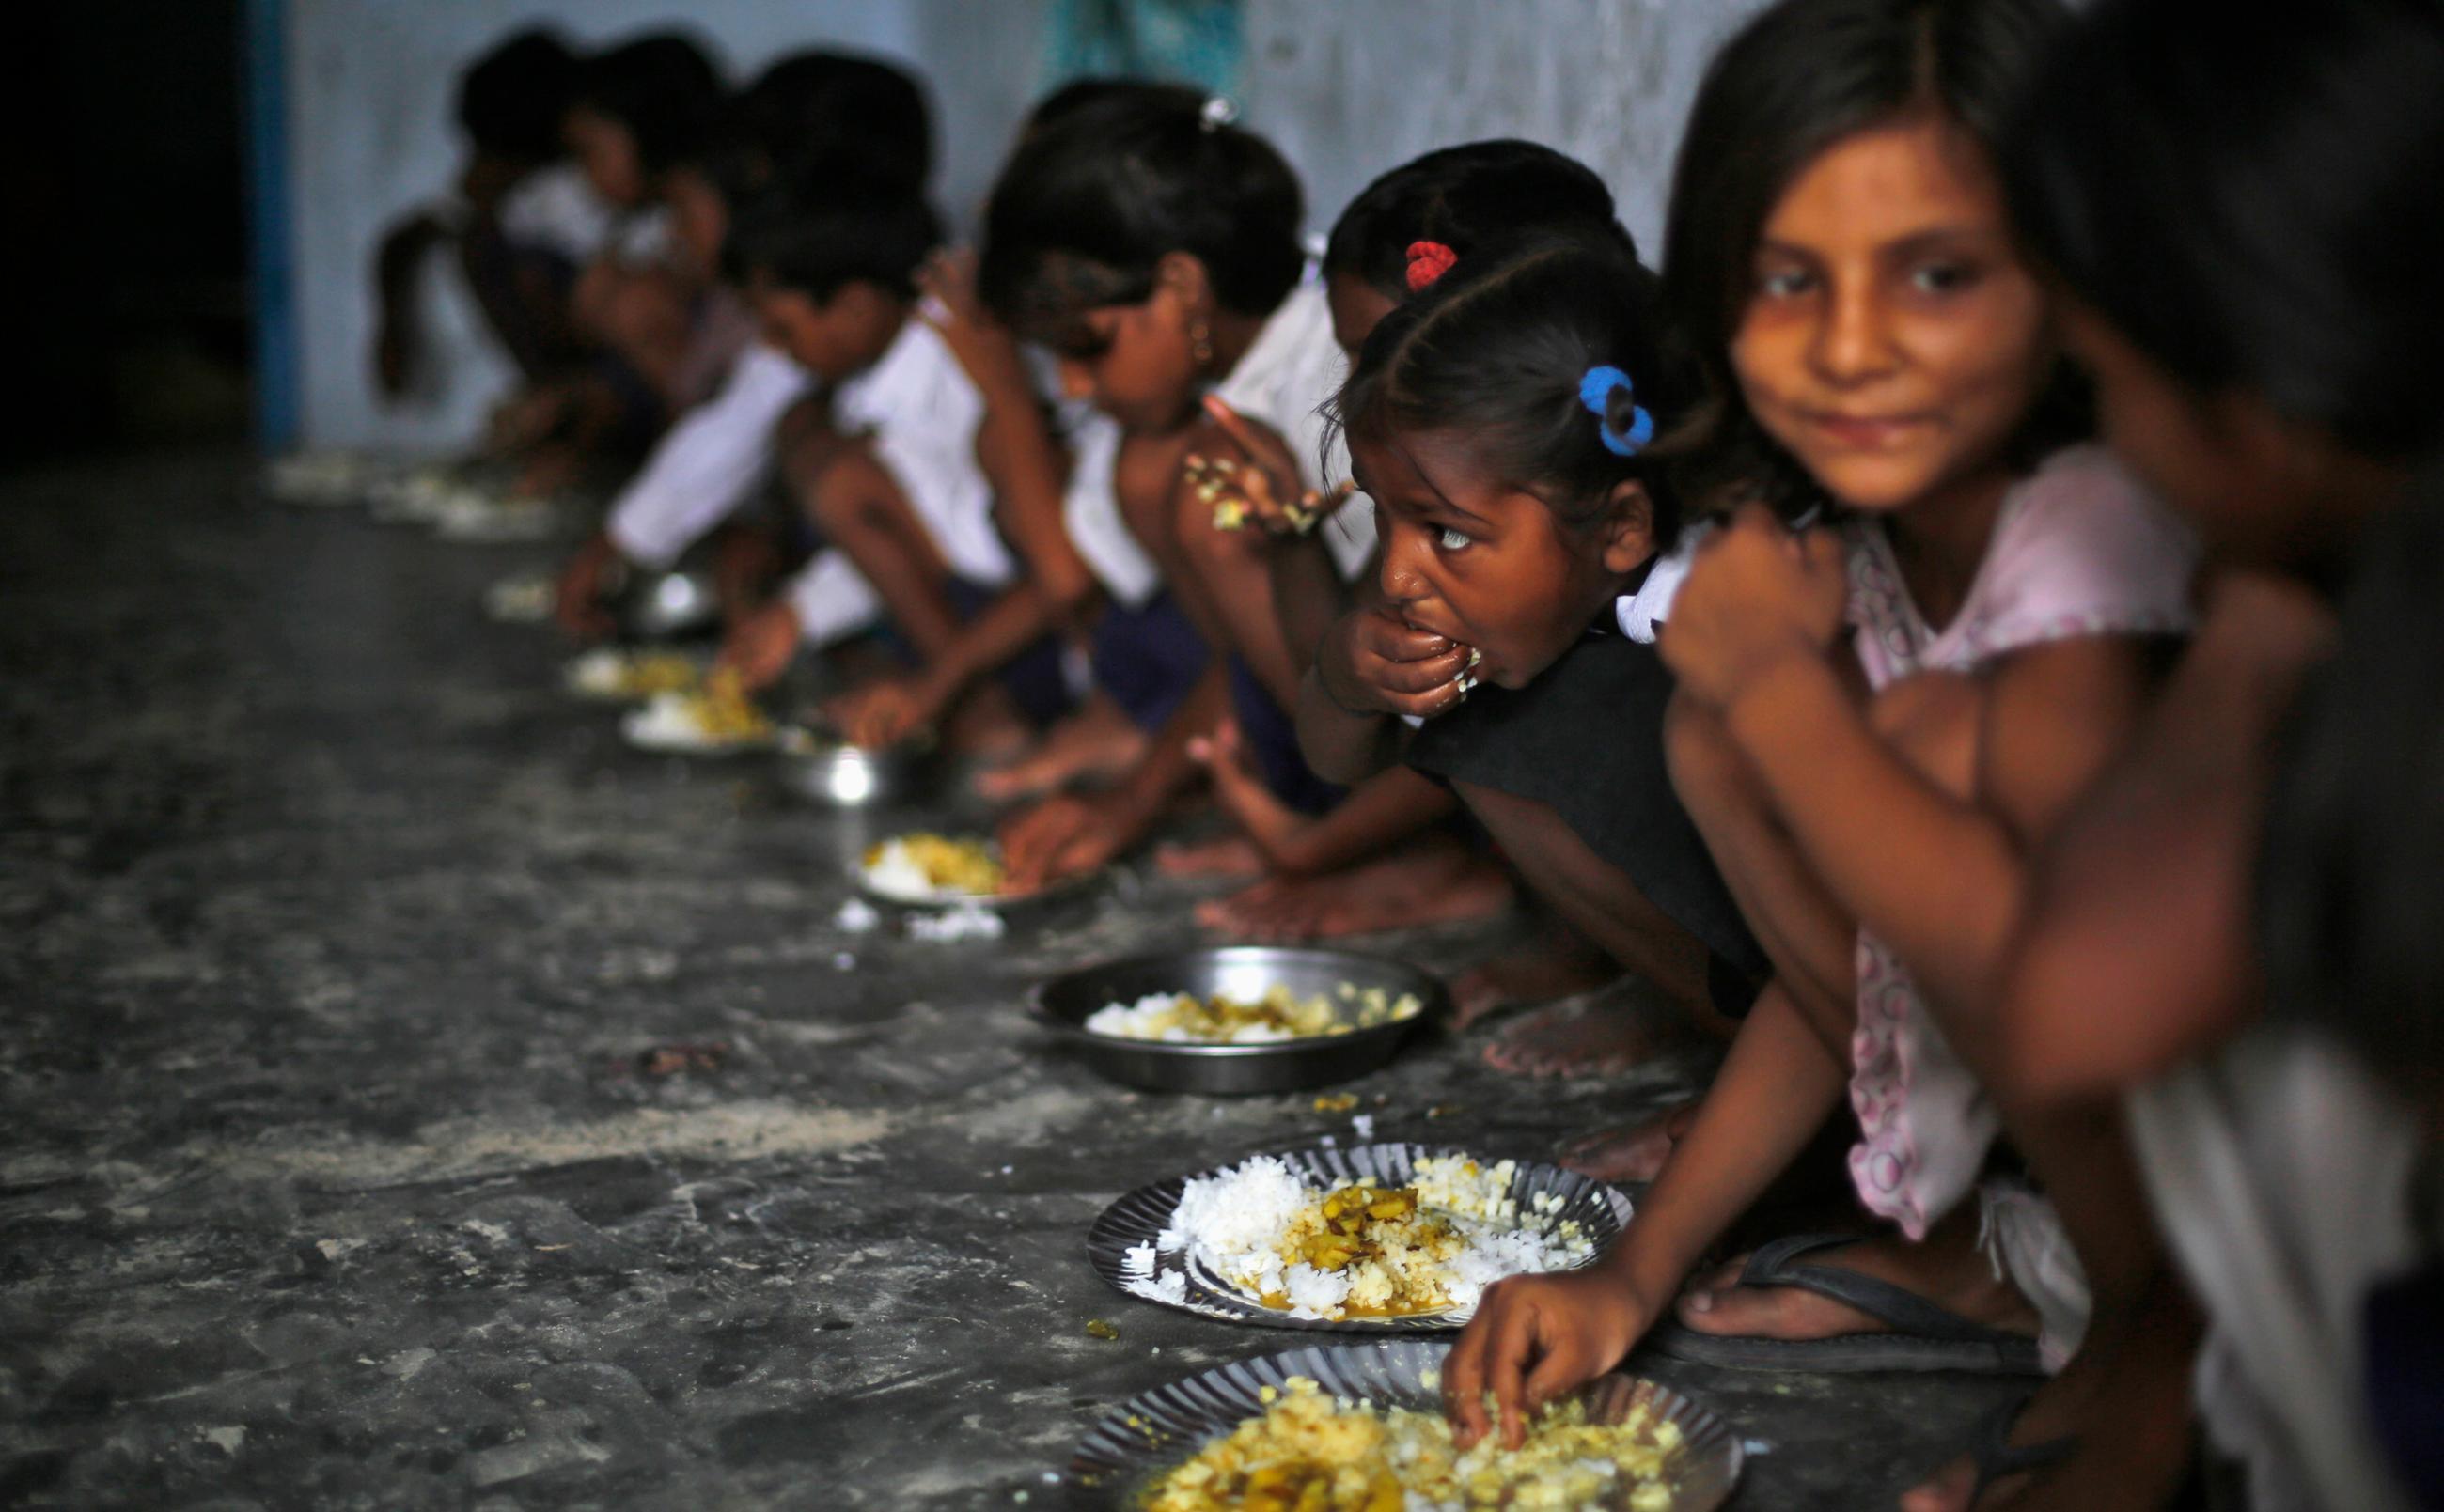 The photo shows a class of young children lined up against a wall, seated, and eating plates of rice and curry with their hands. 